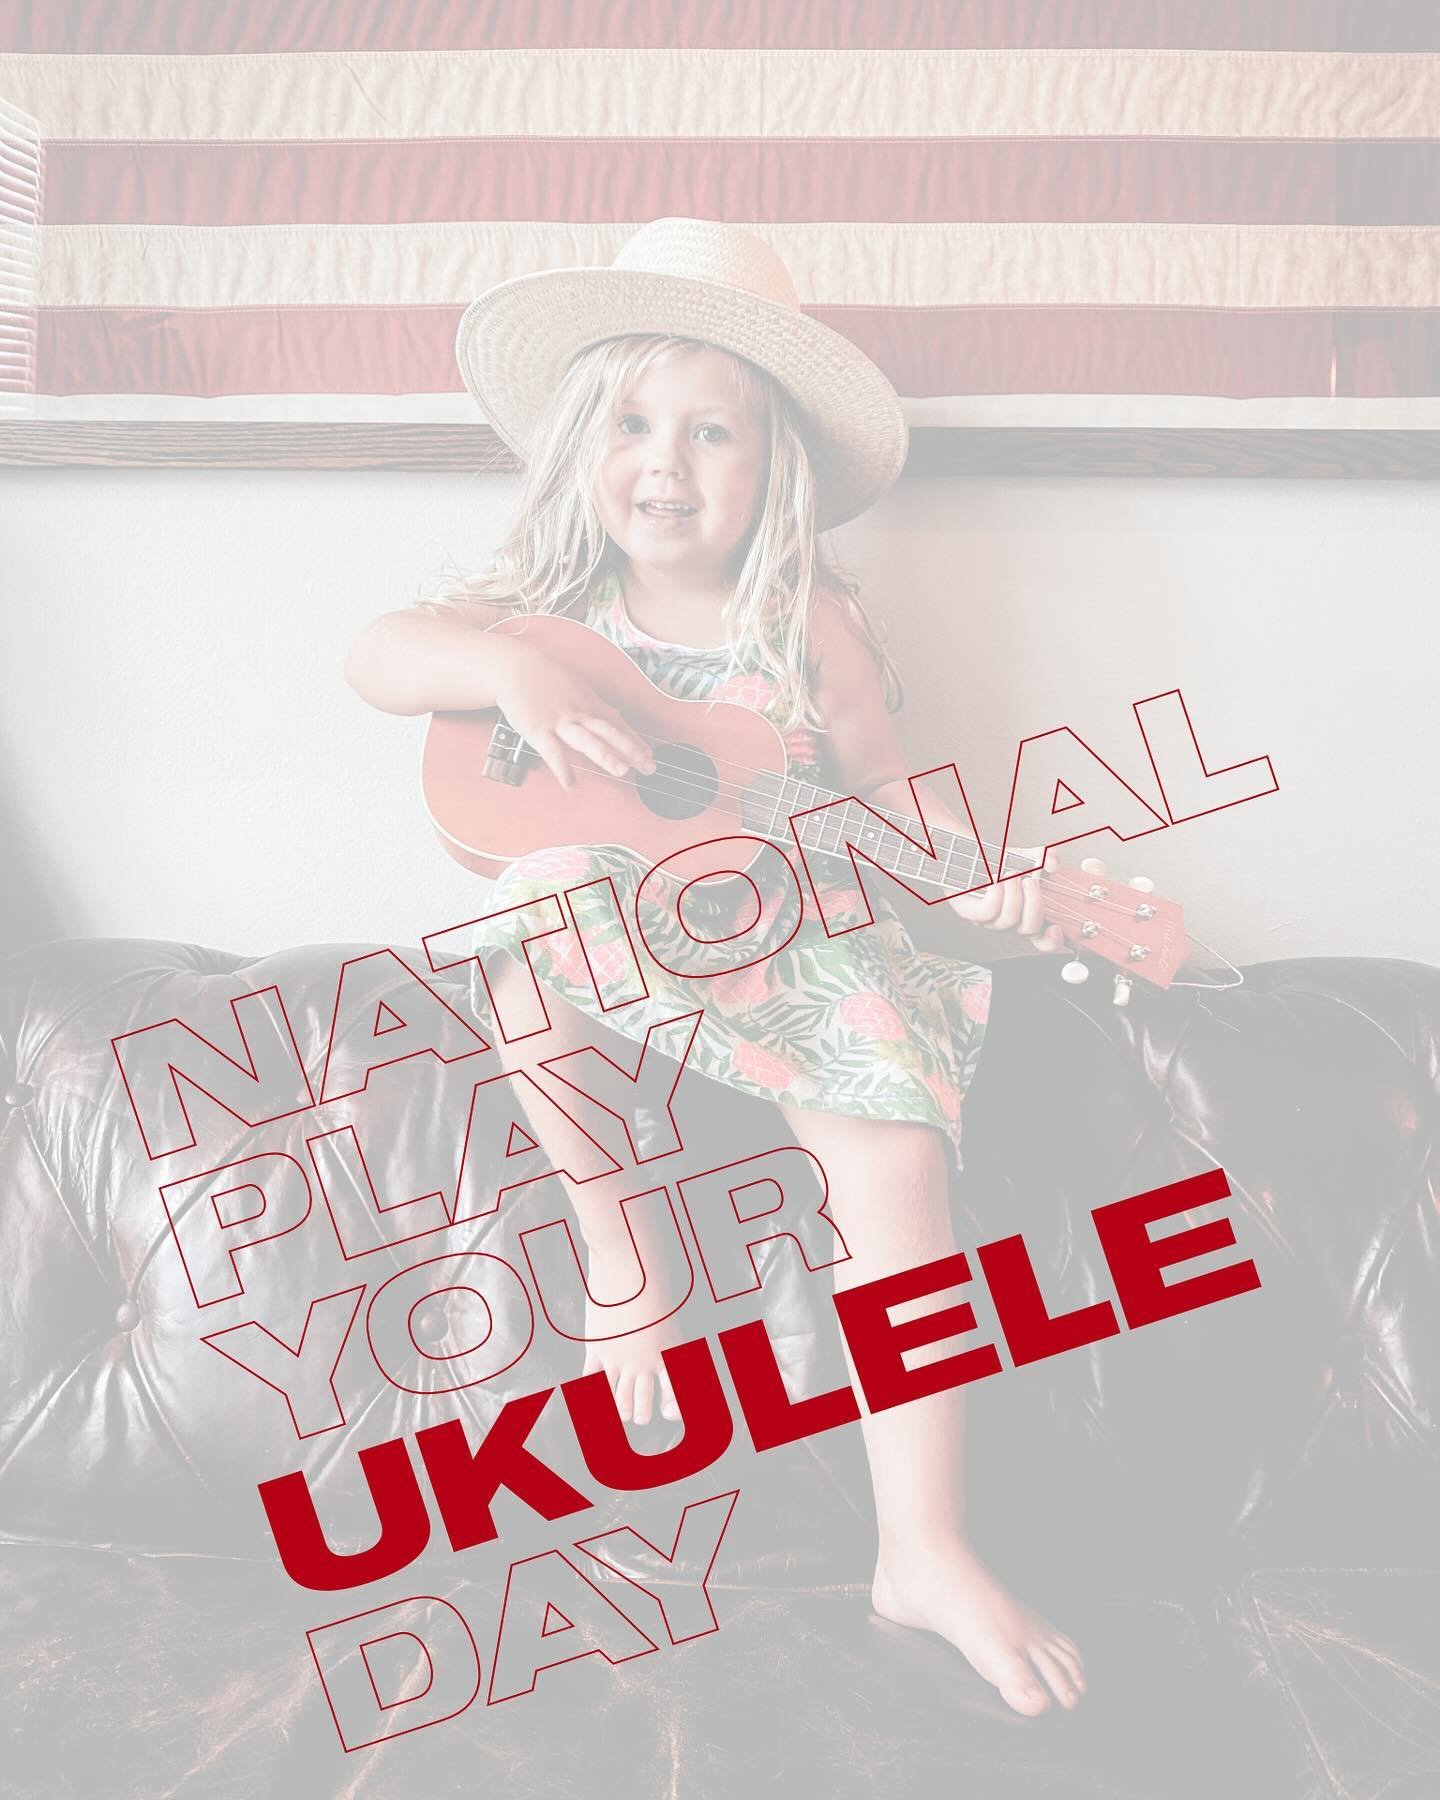 Shoutout to all the UKULELE players!!!
May 2nd is your day to shine🌟
If you&rsquo;ve been wanting to learn to play the ukulele&hellip;now is the perfect time😀
Call/text us to set up a free trial lesson 805-492-1676
#allaboutthatukulele #nationalpla